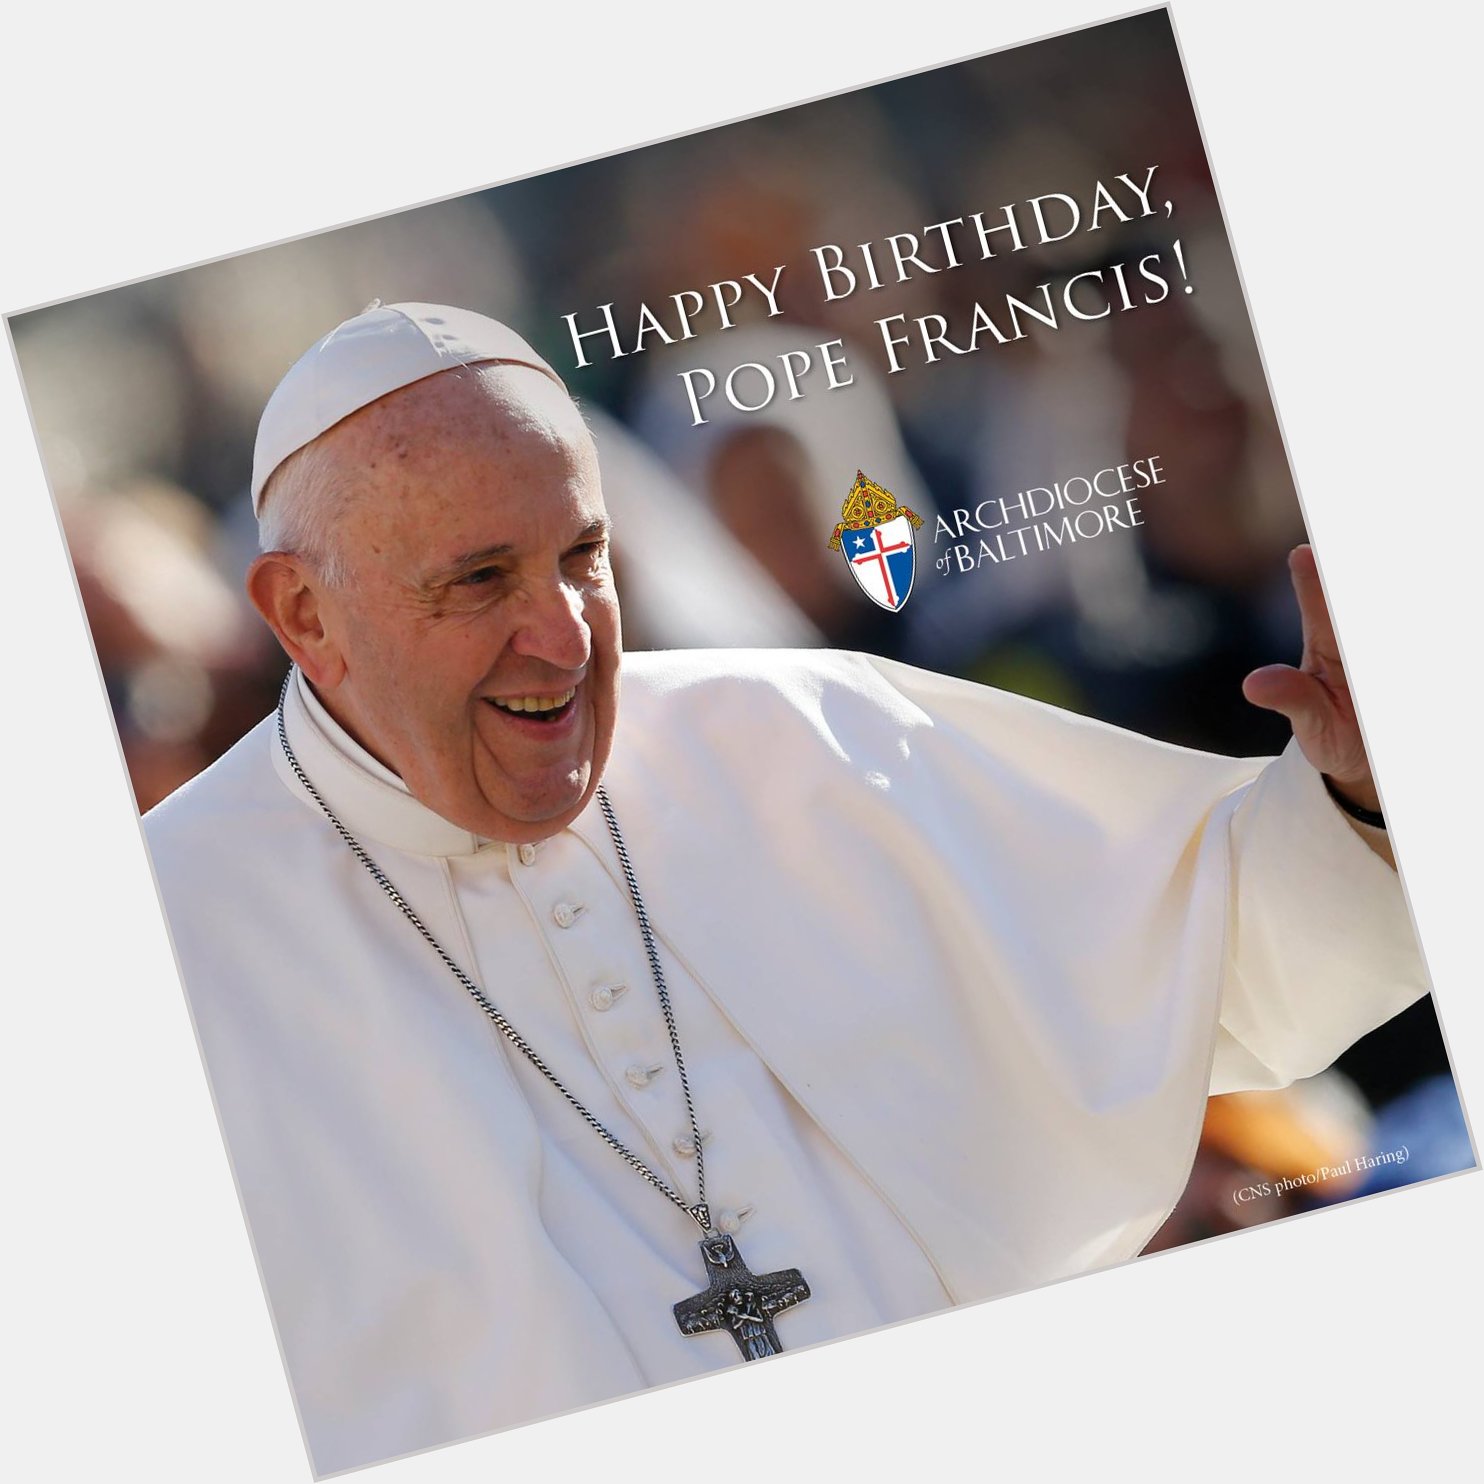 Happy 85th Birthday, Pope Francis!

Join us in wishing Pope Francis a most wonderful birthday! 